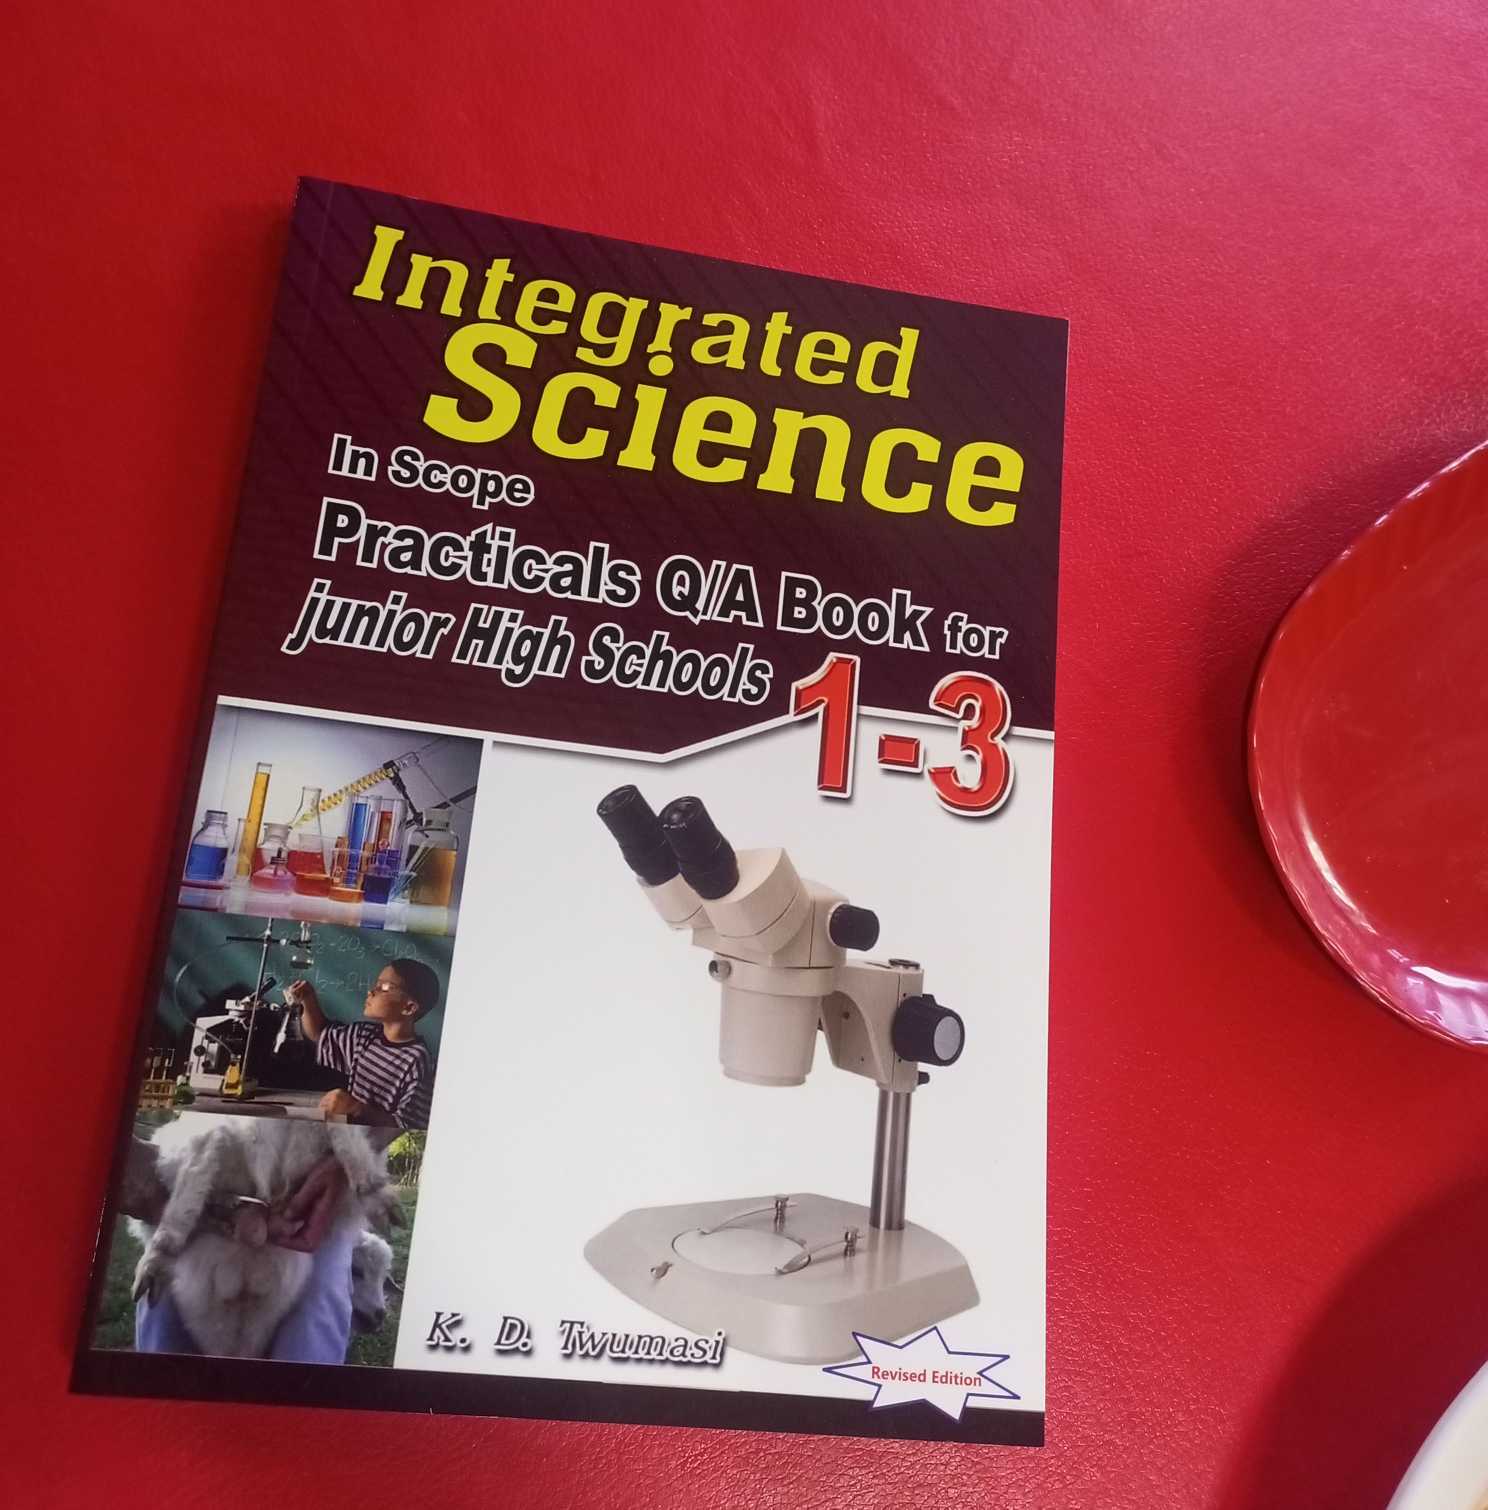 Integrated Science In Scope Practicals Q/A for JHS 1-3